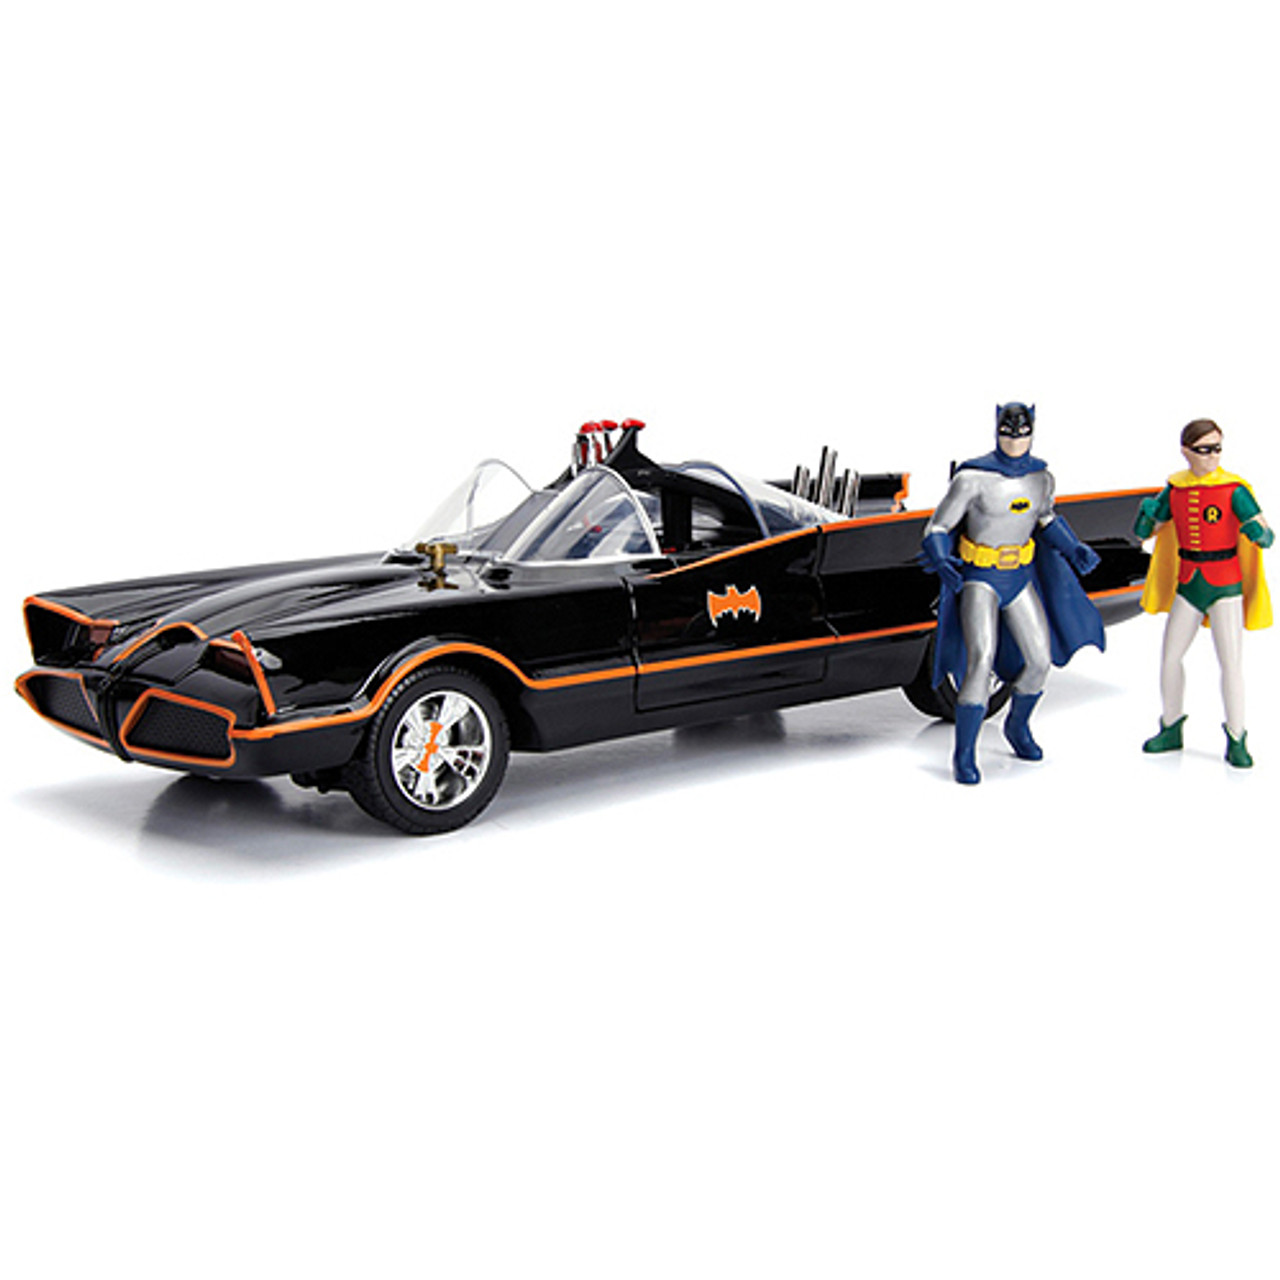 Batman & Robin 1966 TV Batmobile 1:18 Scale Diecast Model by Jada Toys |  Fairfield Collectibles - The #1 Source For High Quality Diecast Scale Model  Cars